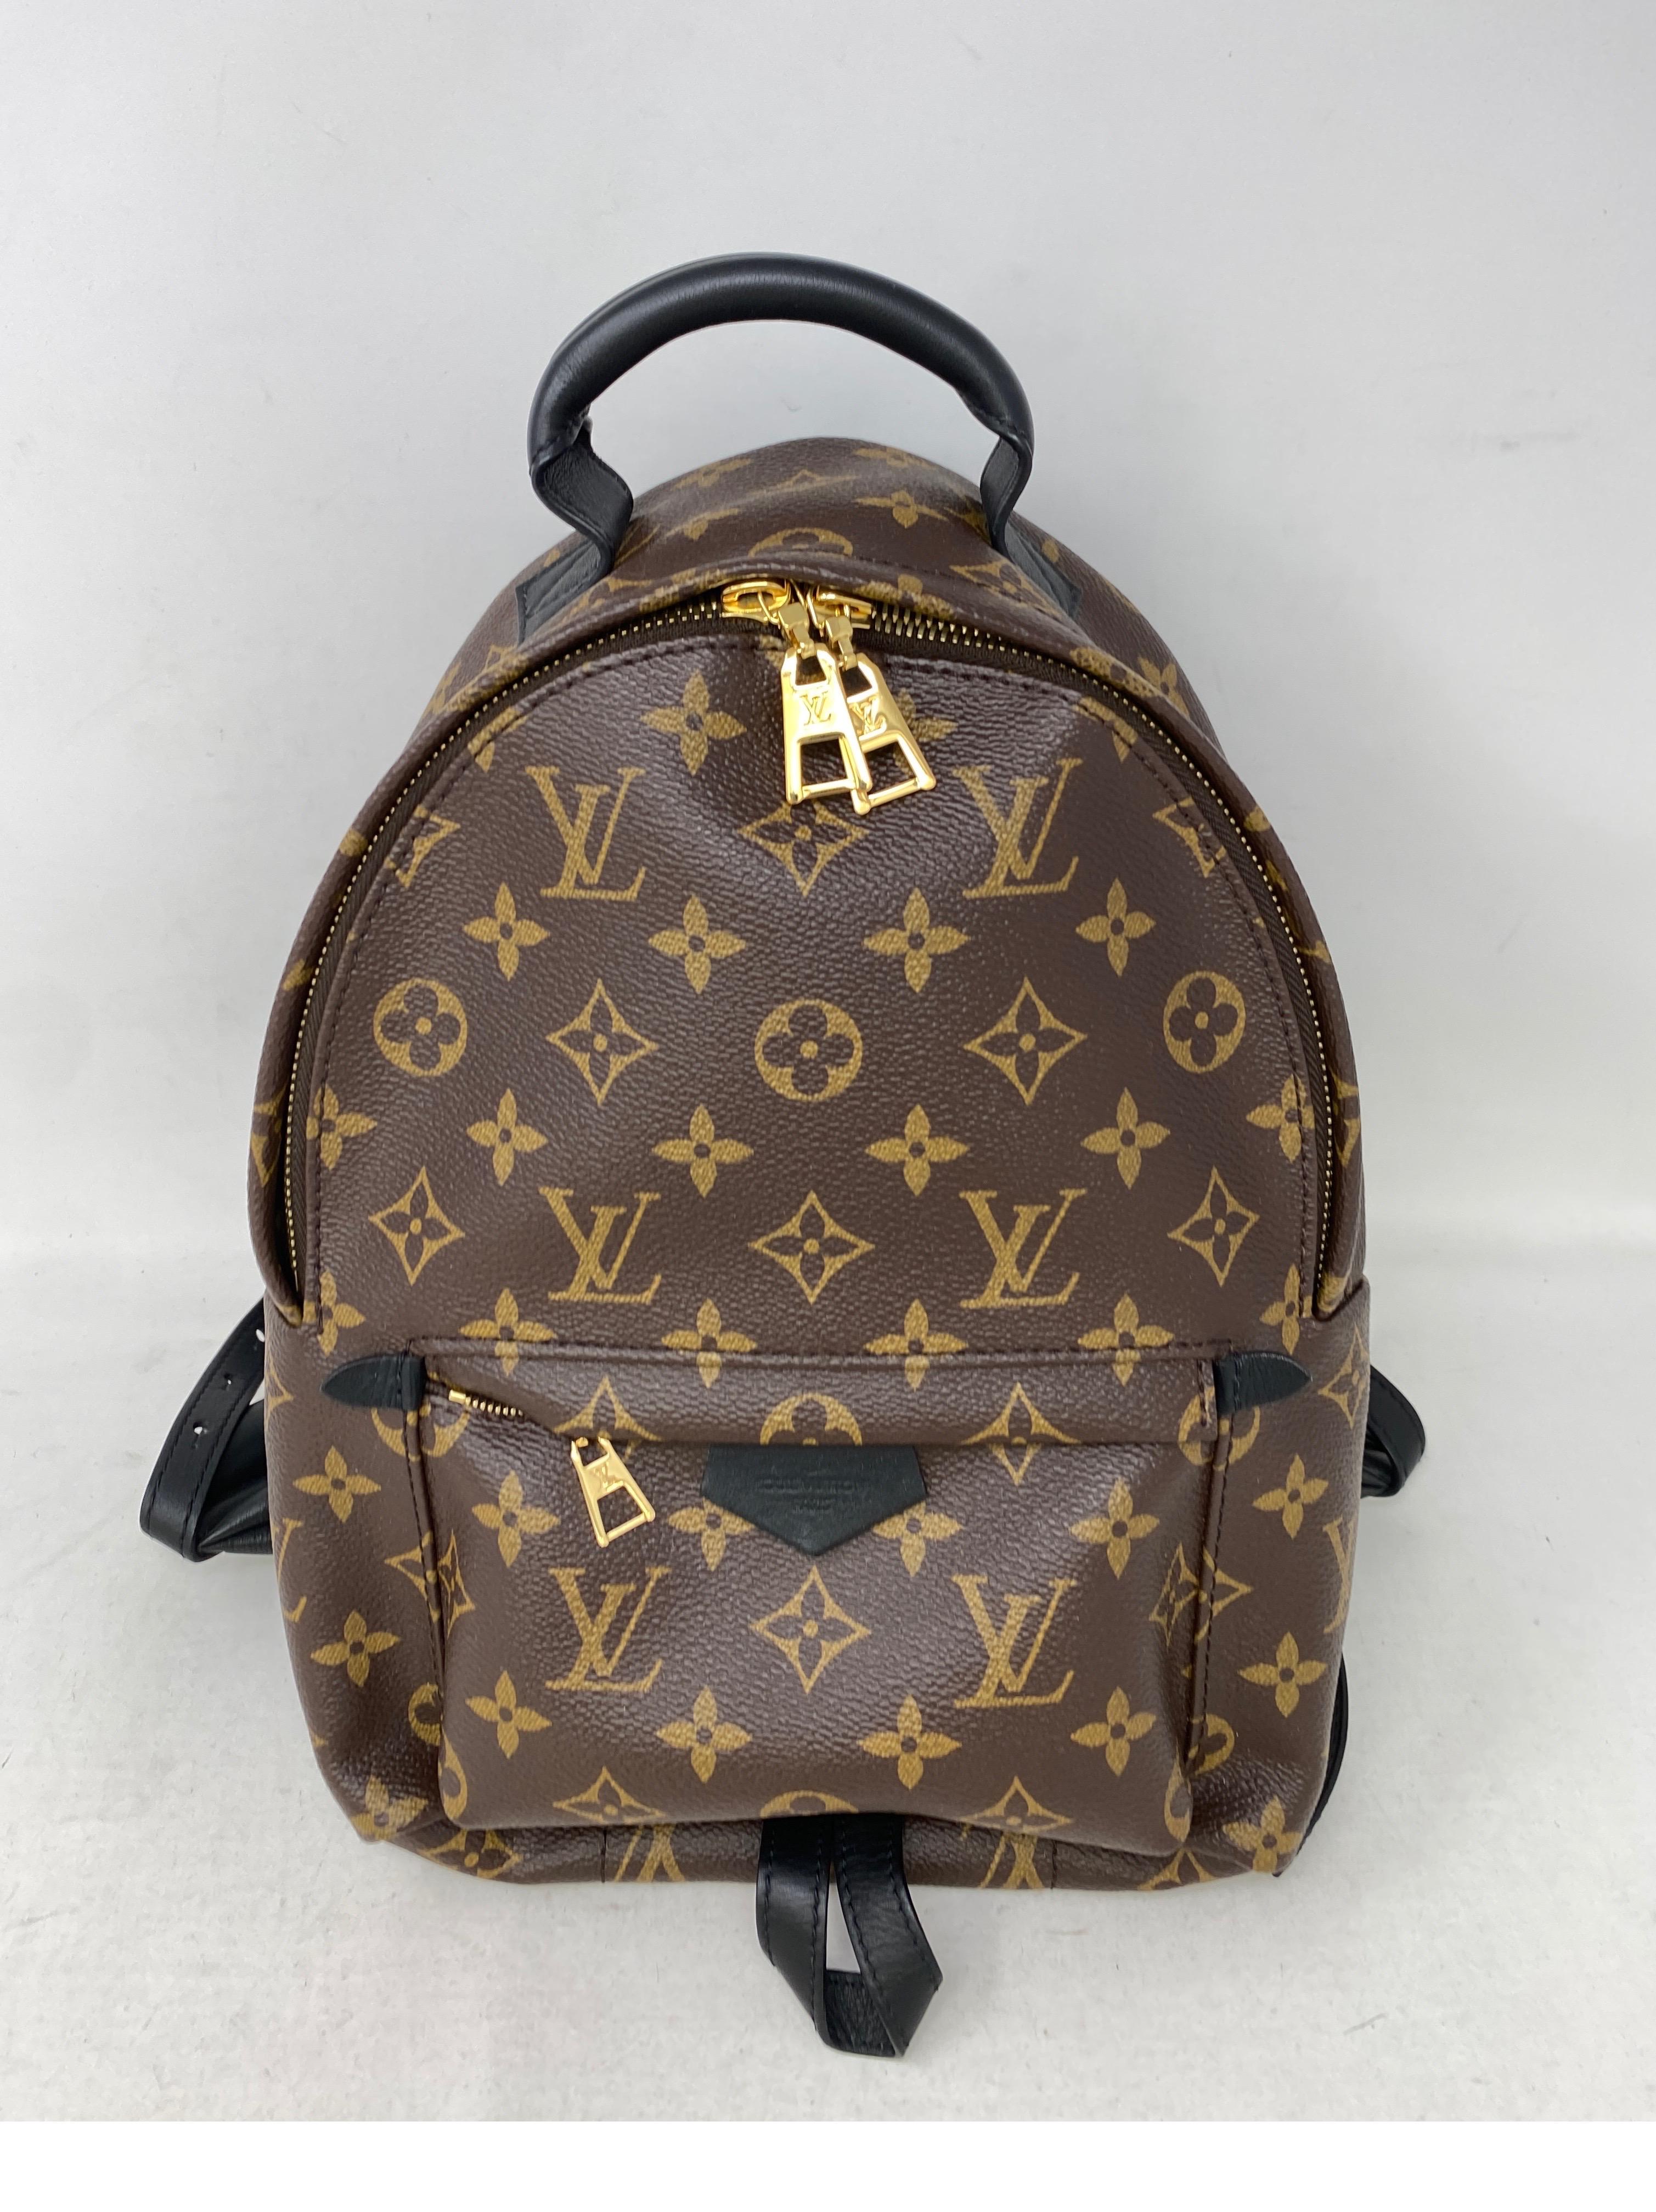 Louis Vuitton Palm Springs Backpack PM. Small size backpack. Mint like new condition. Sold out at LV. Great travel or every day backpack. Guaranteed authentic. 